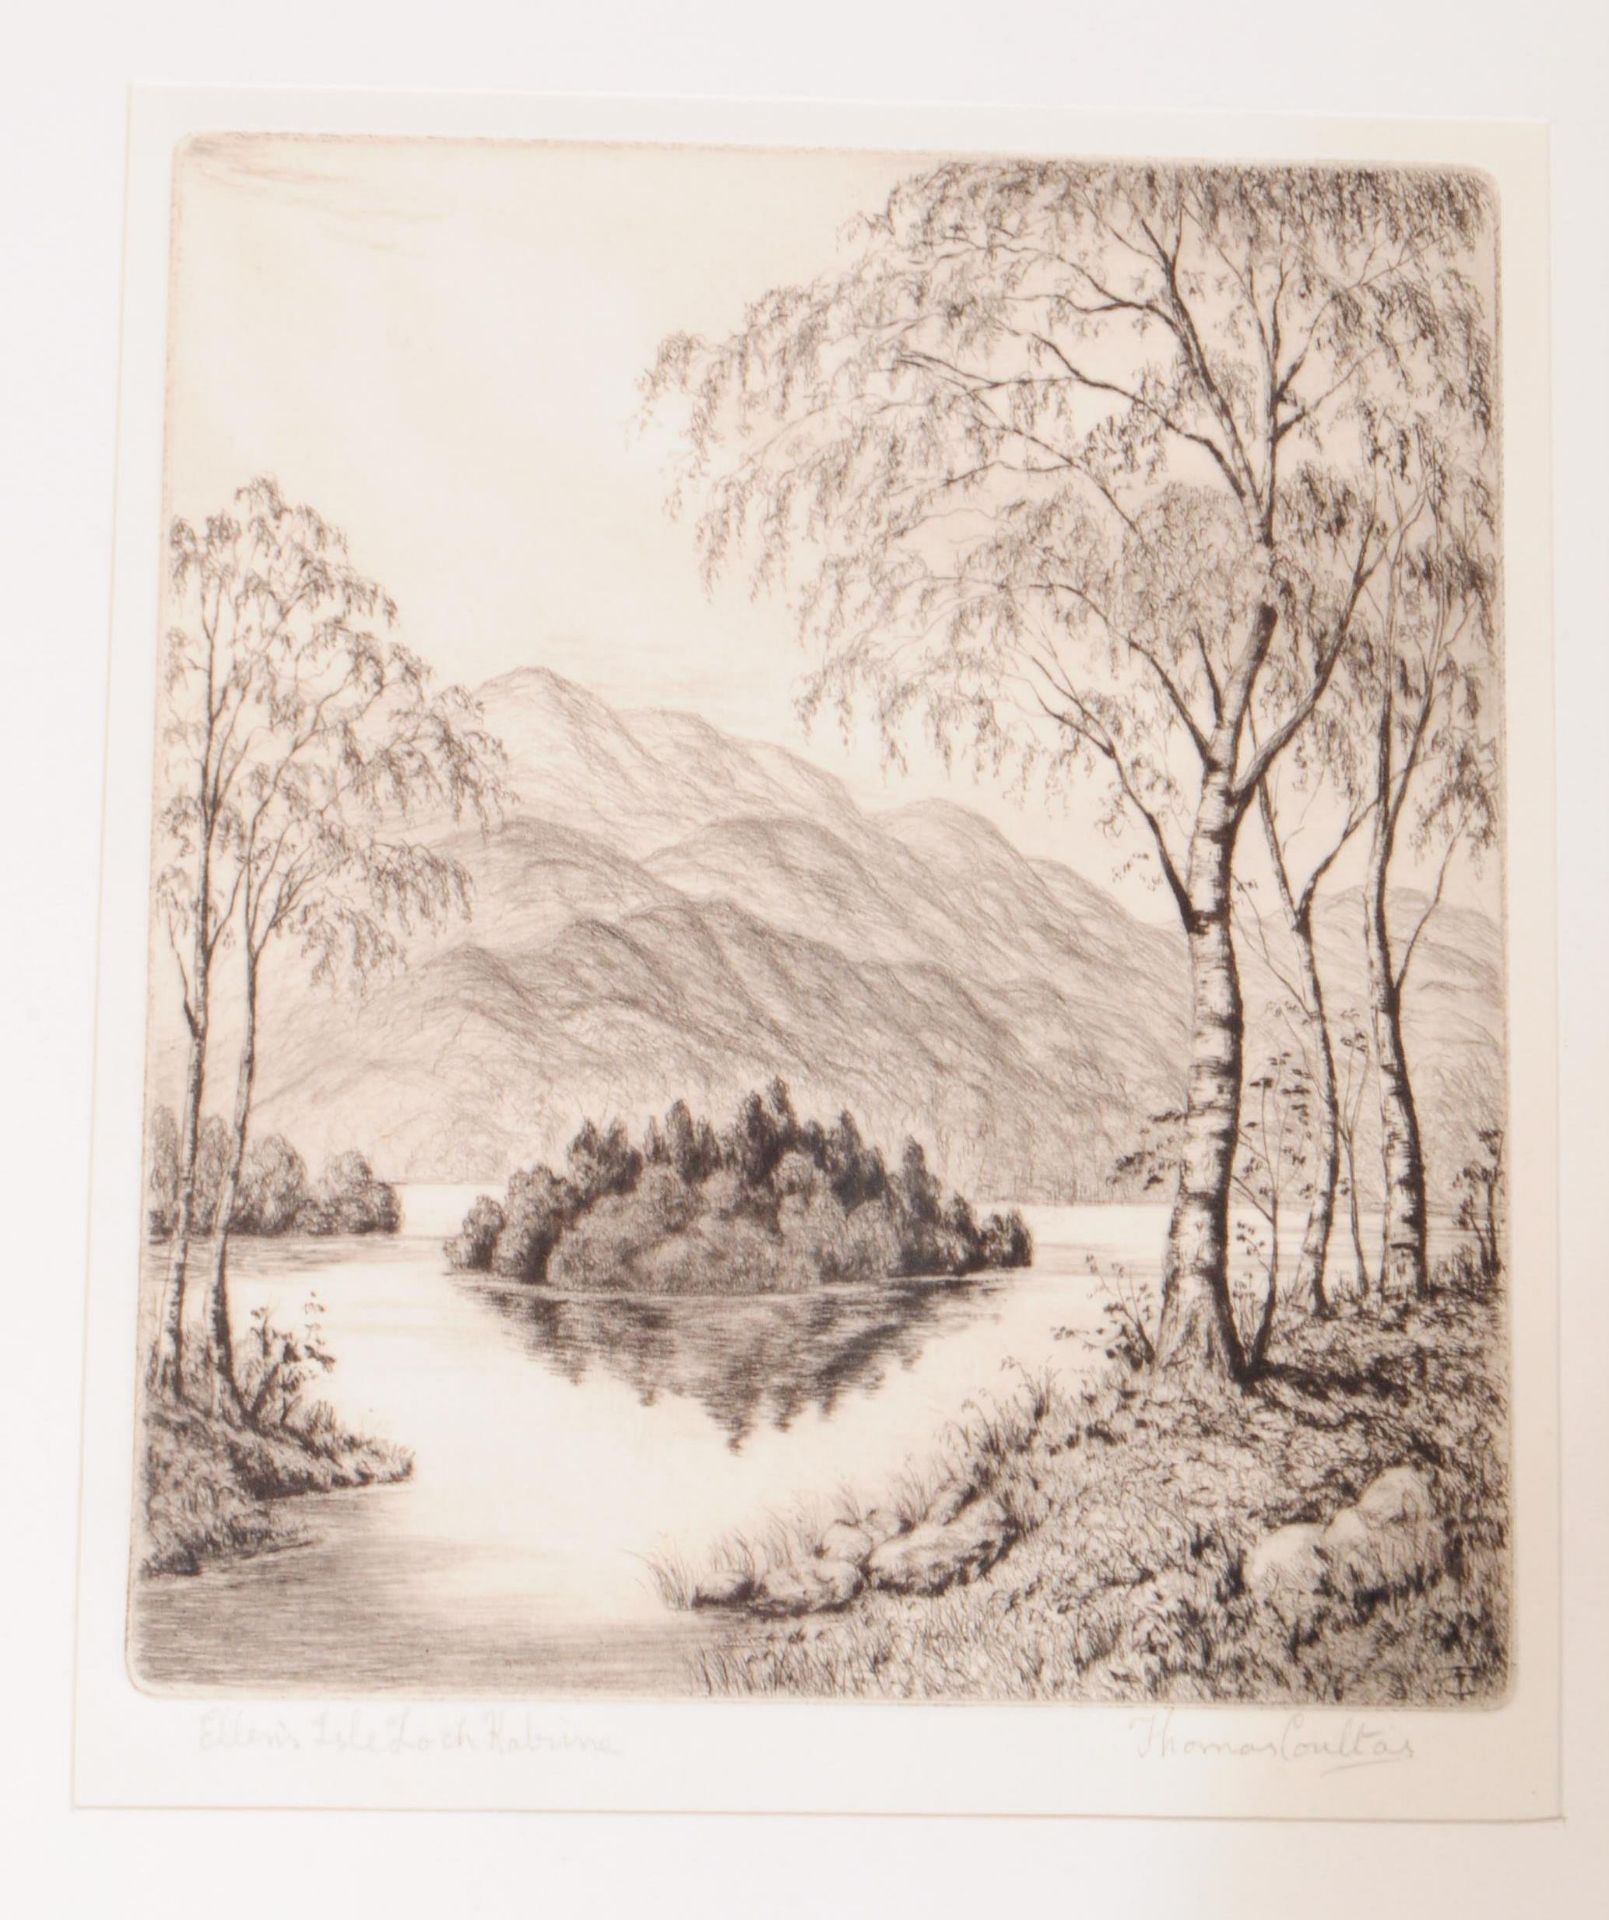 THOMAS COULTAS - FRAMED DRYPOINT ETCHING - Image 2 of 3